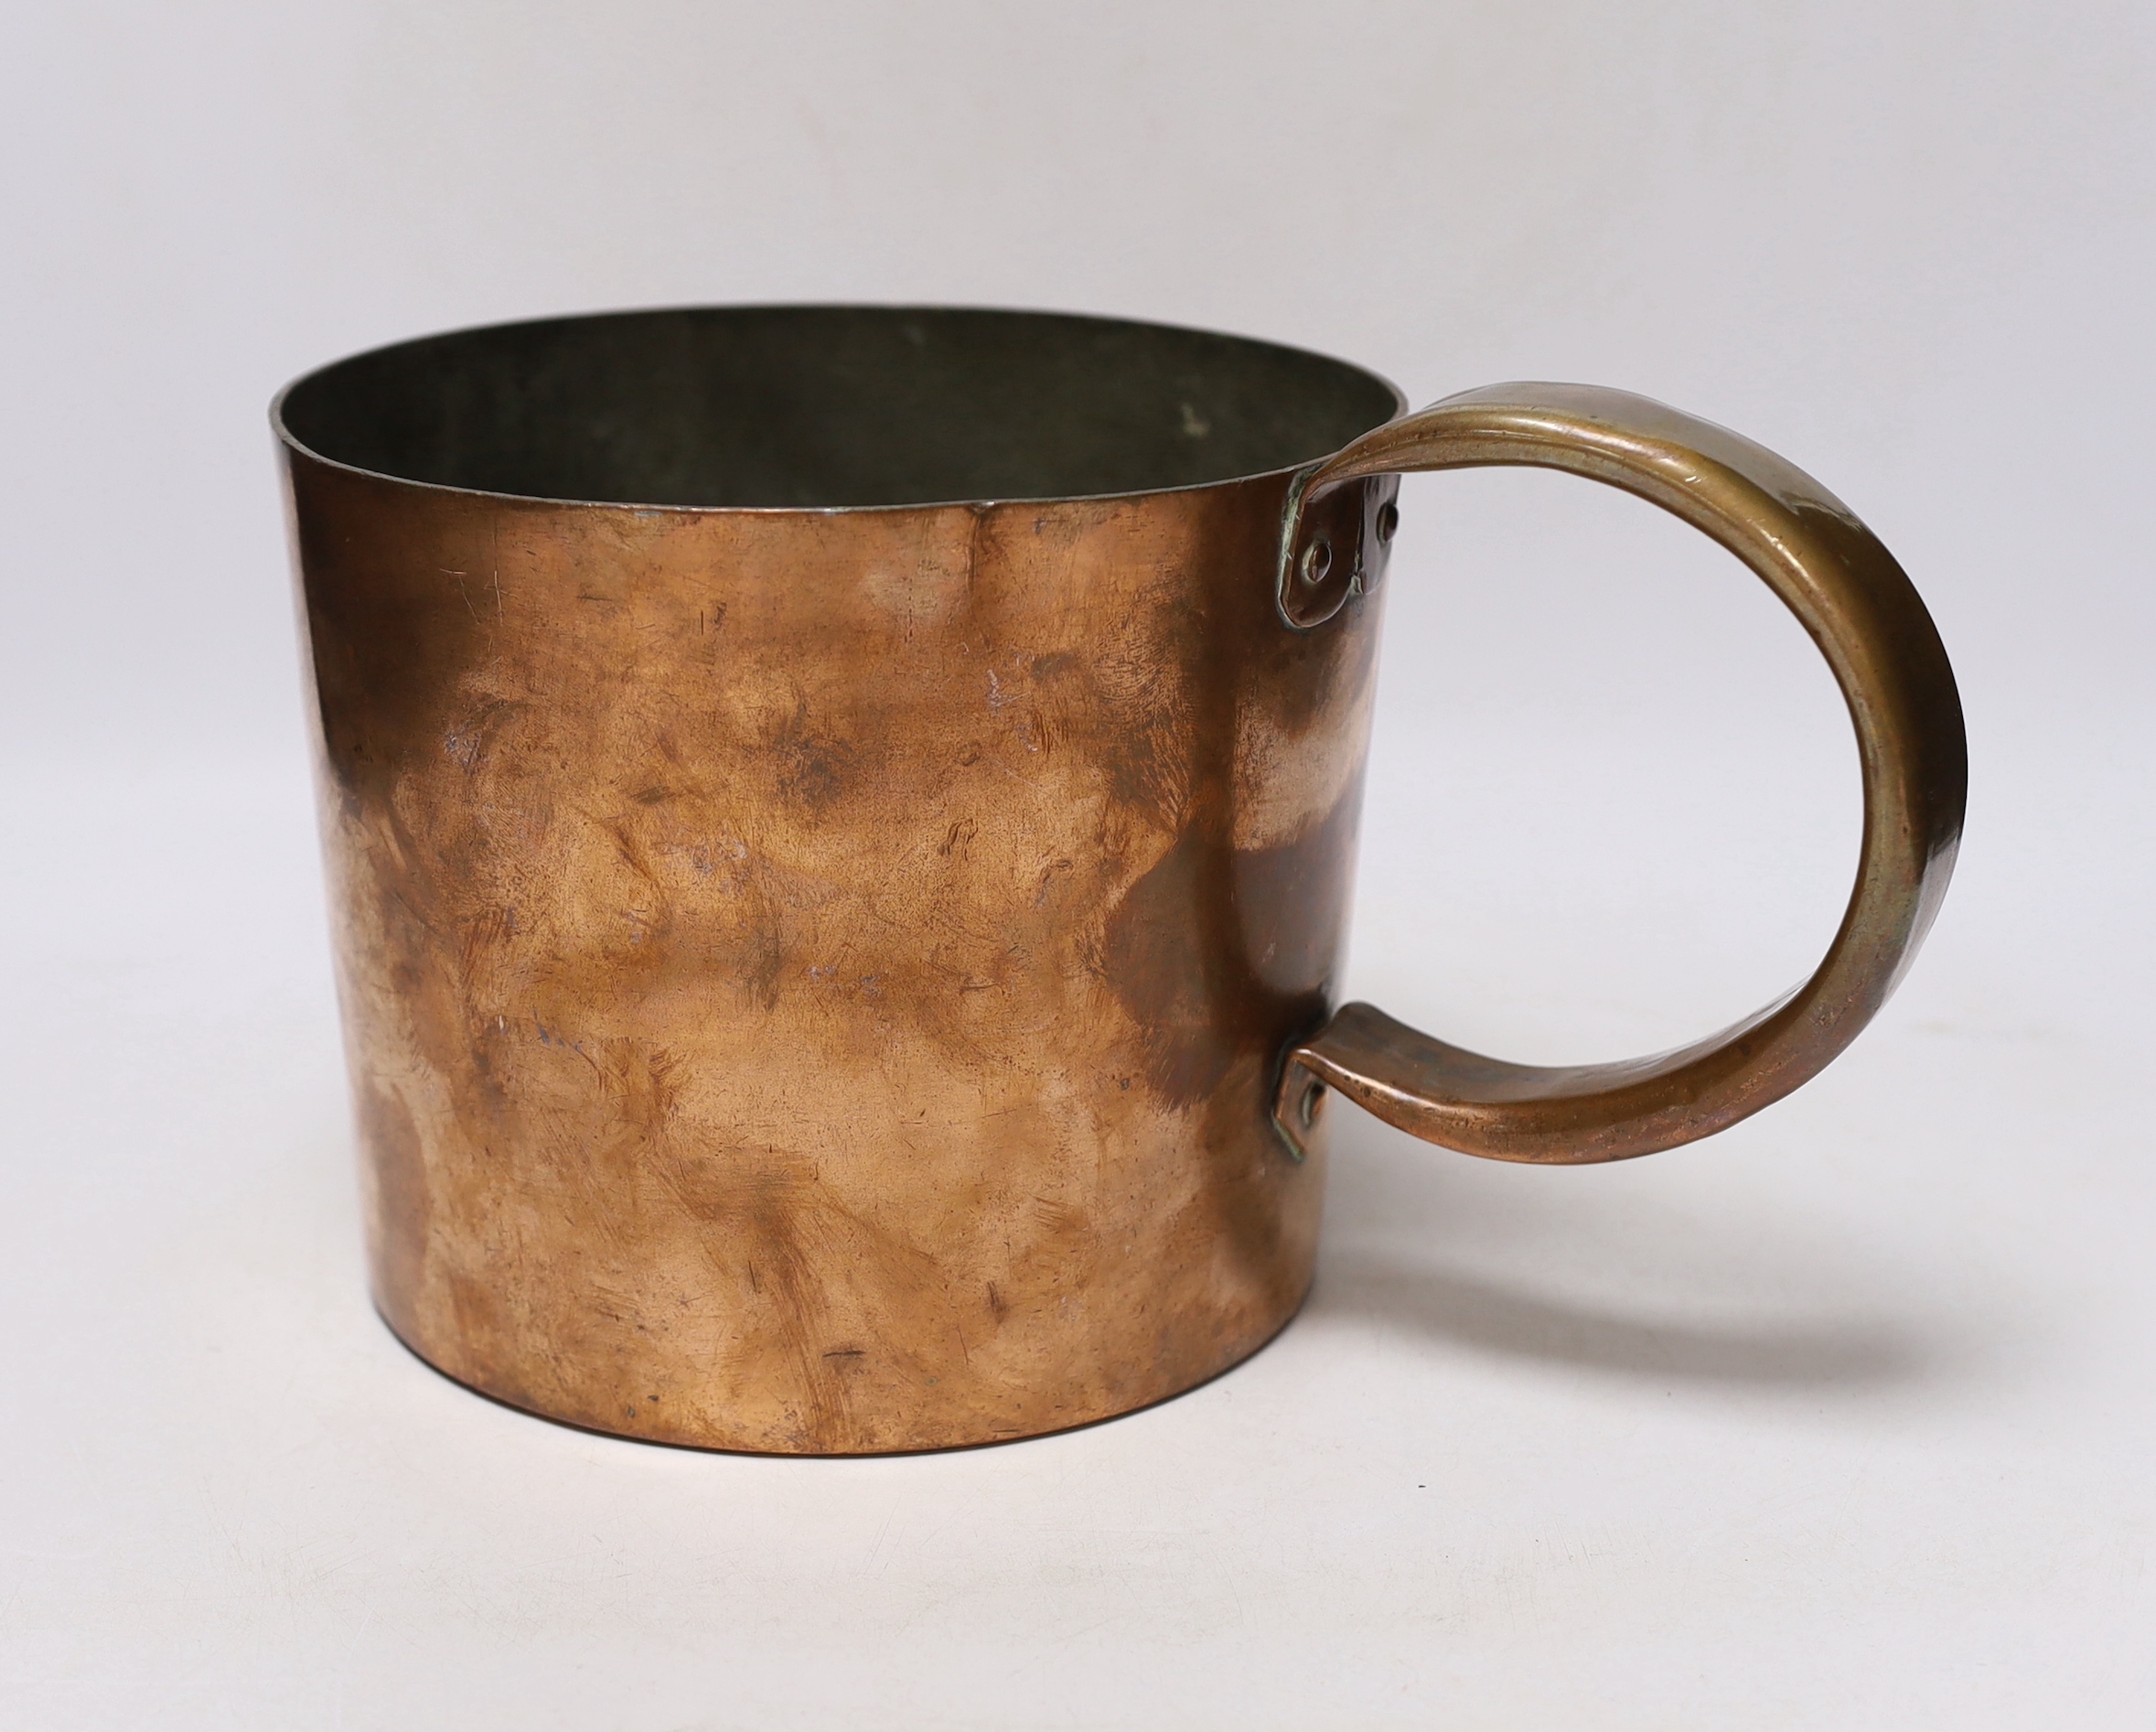 A one gallon Royal Navy rum measure, stamped 1941, handle 18cm high